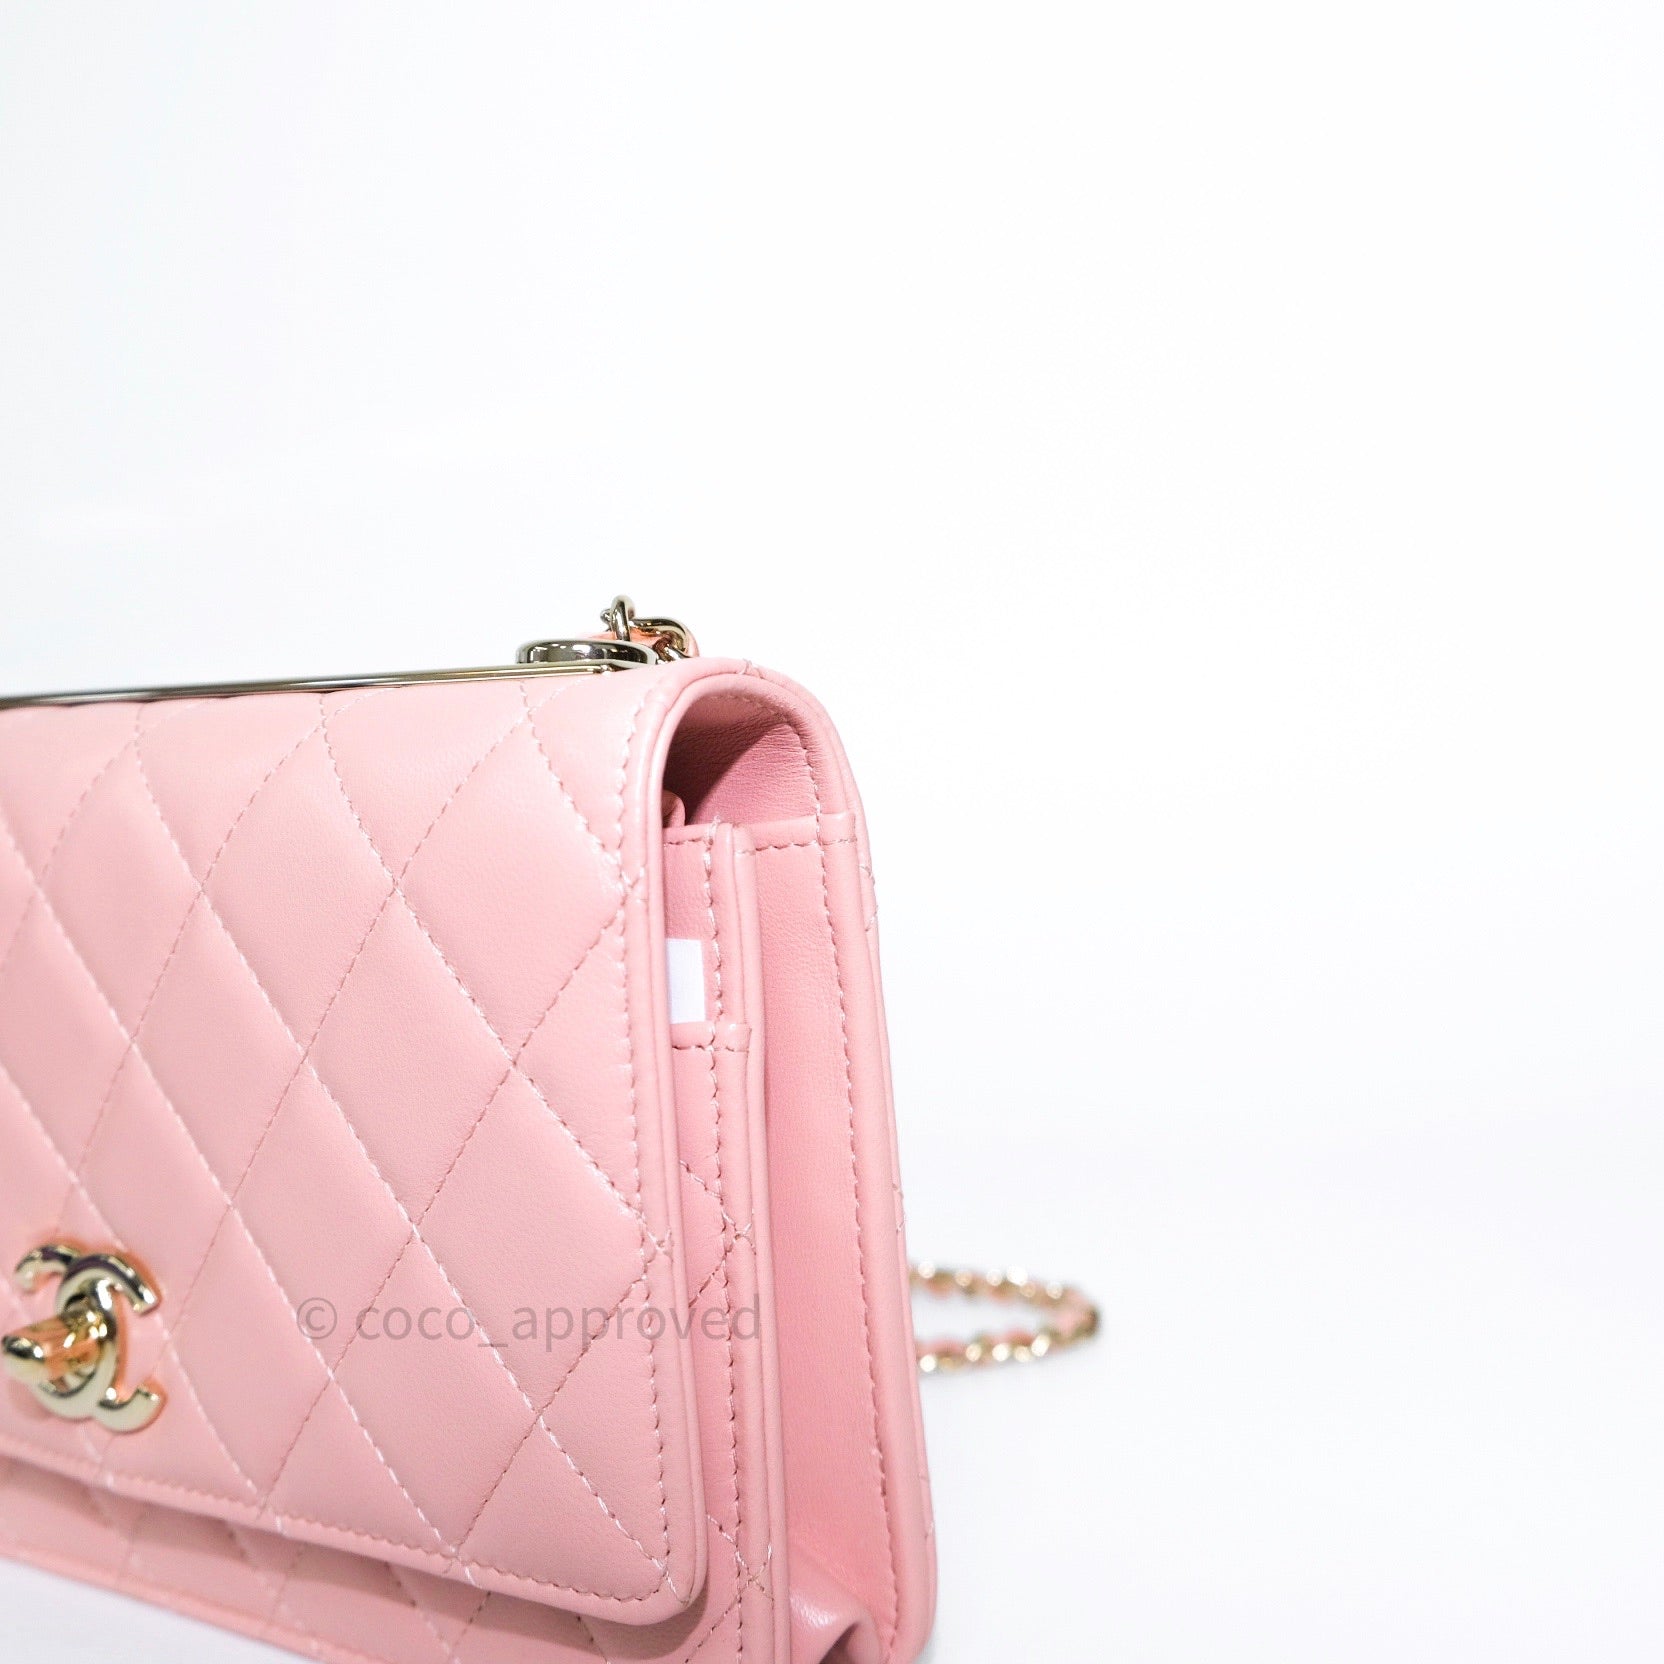 Chanel Pale Pink Quilted Caviar Wallet on Chain  myGemma  GB  Item  122038